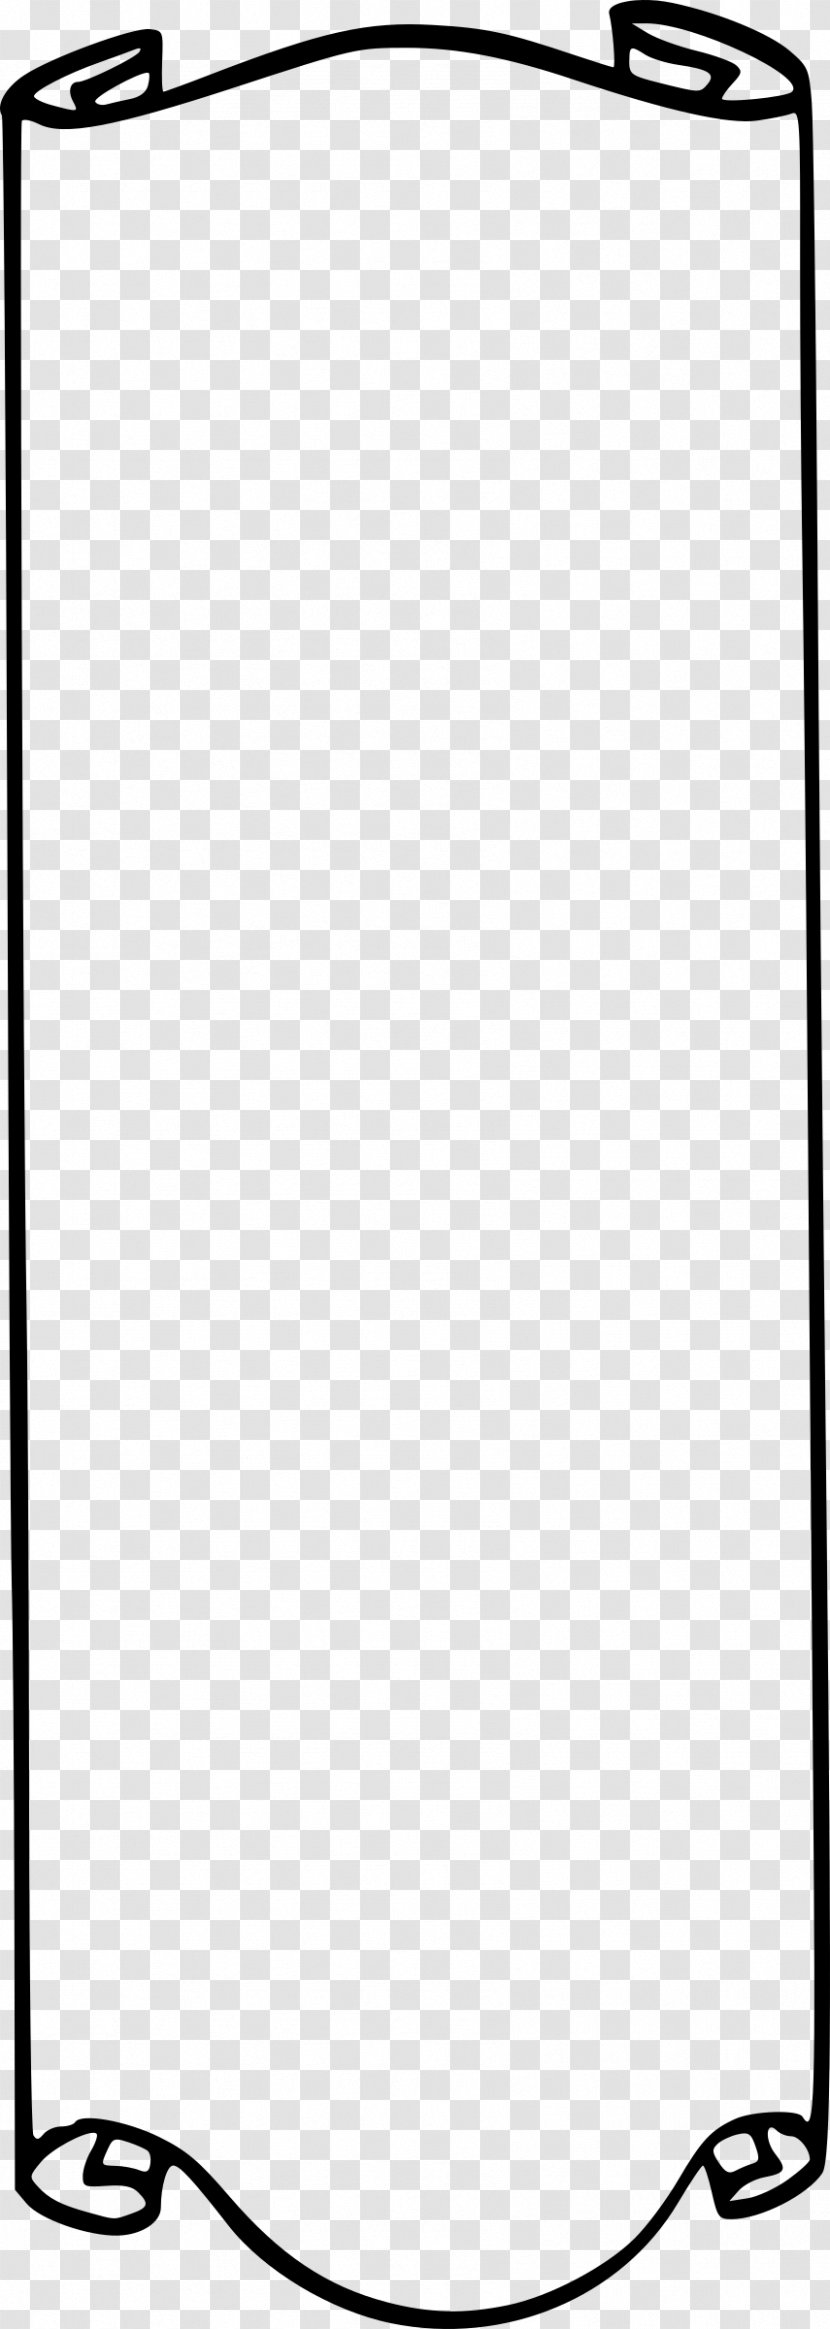 Picture Frames Black And White Clip Art - Frame - Page Transparent PNG